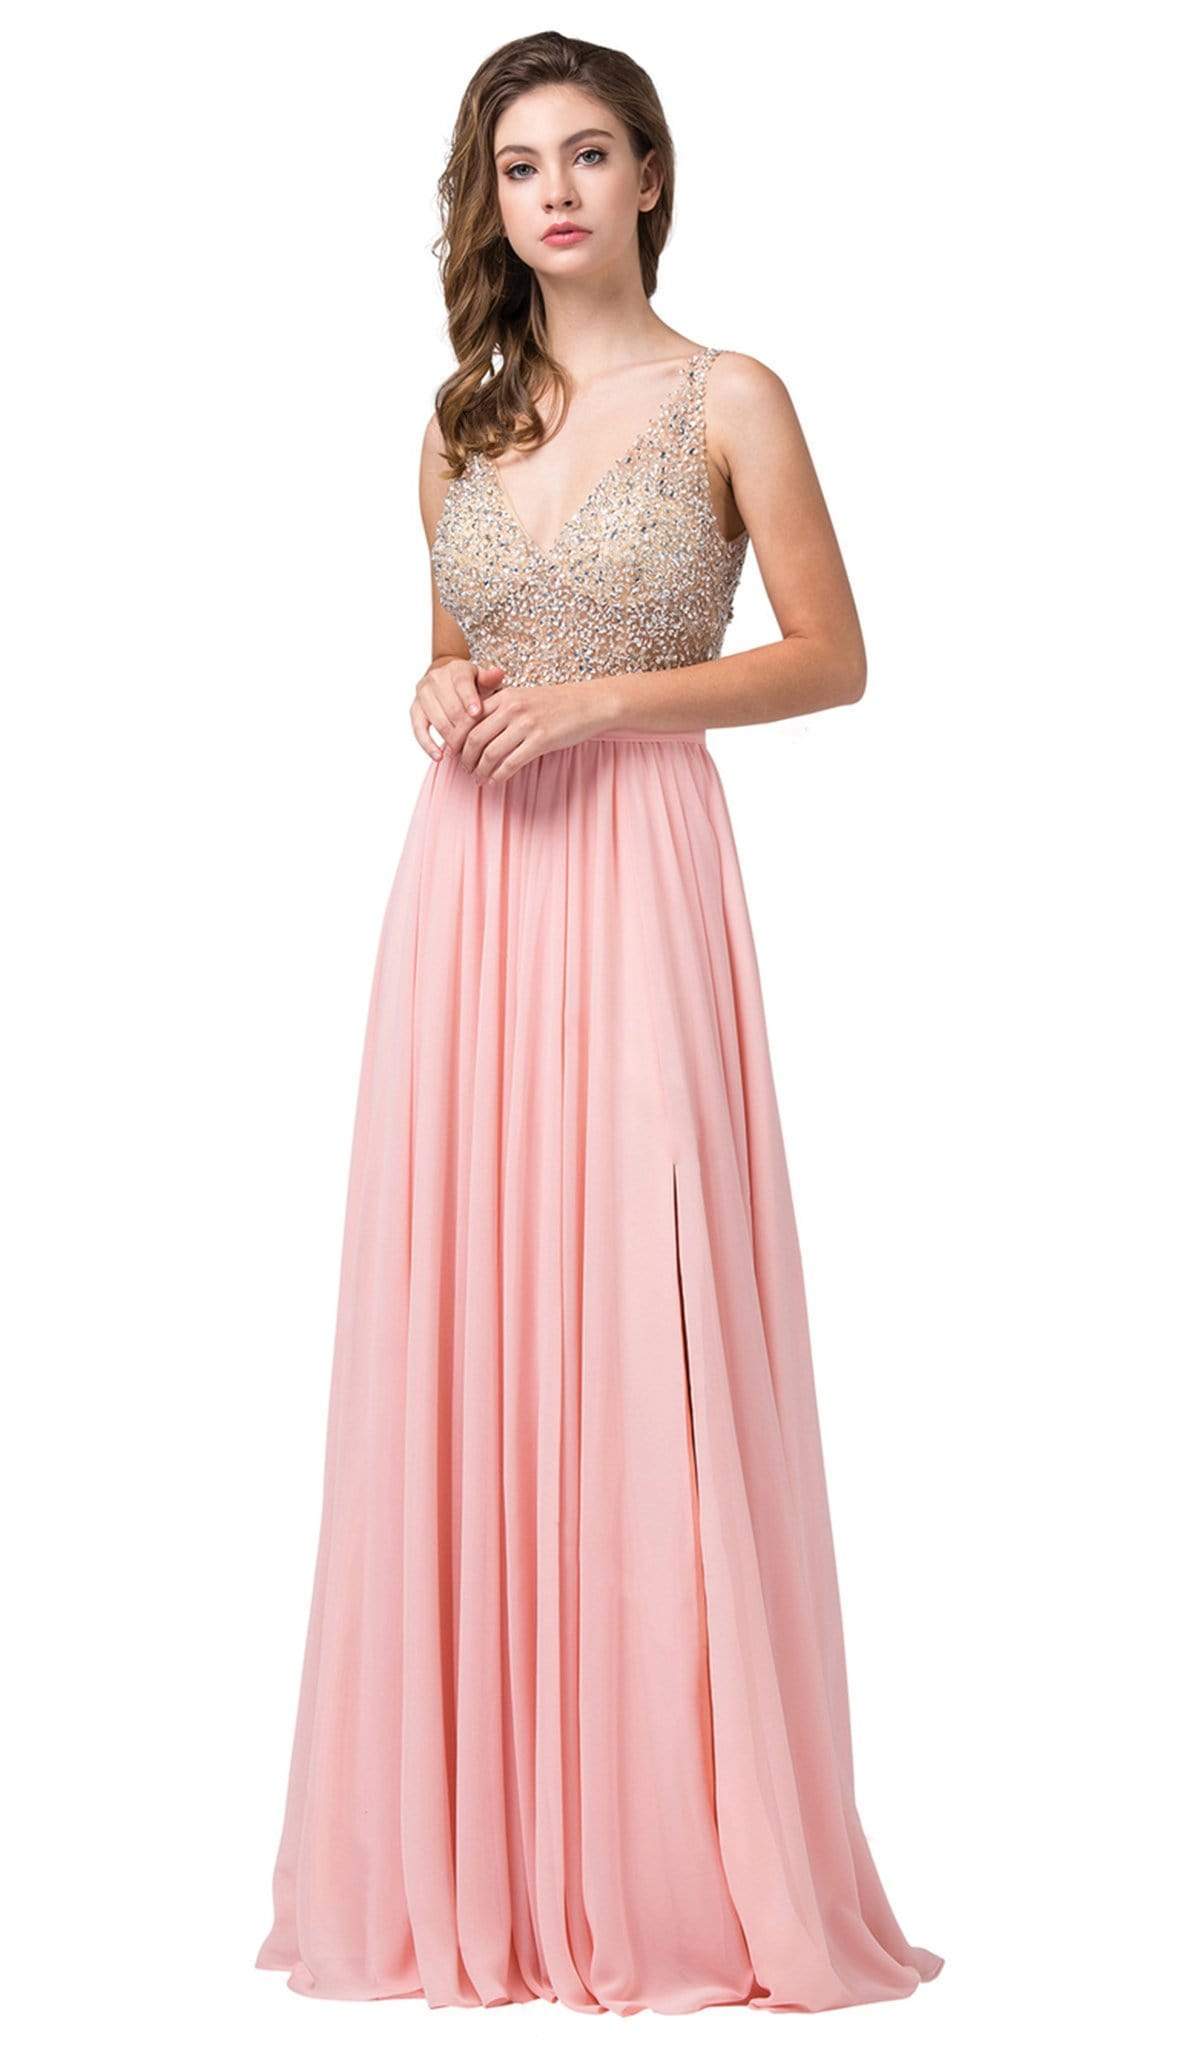 Image of Dancing Queen - 2569 Illusion Beaded Bodice Flowy Prom Dress